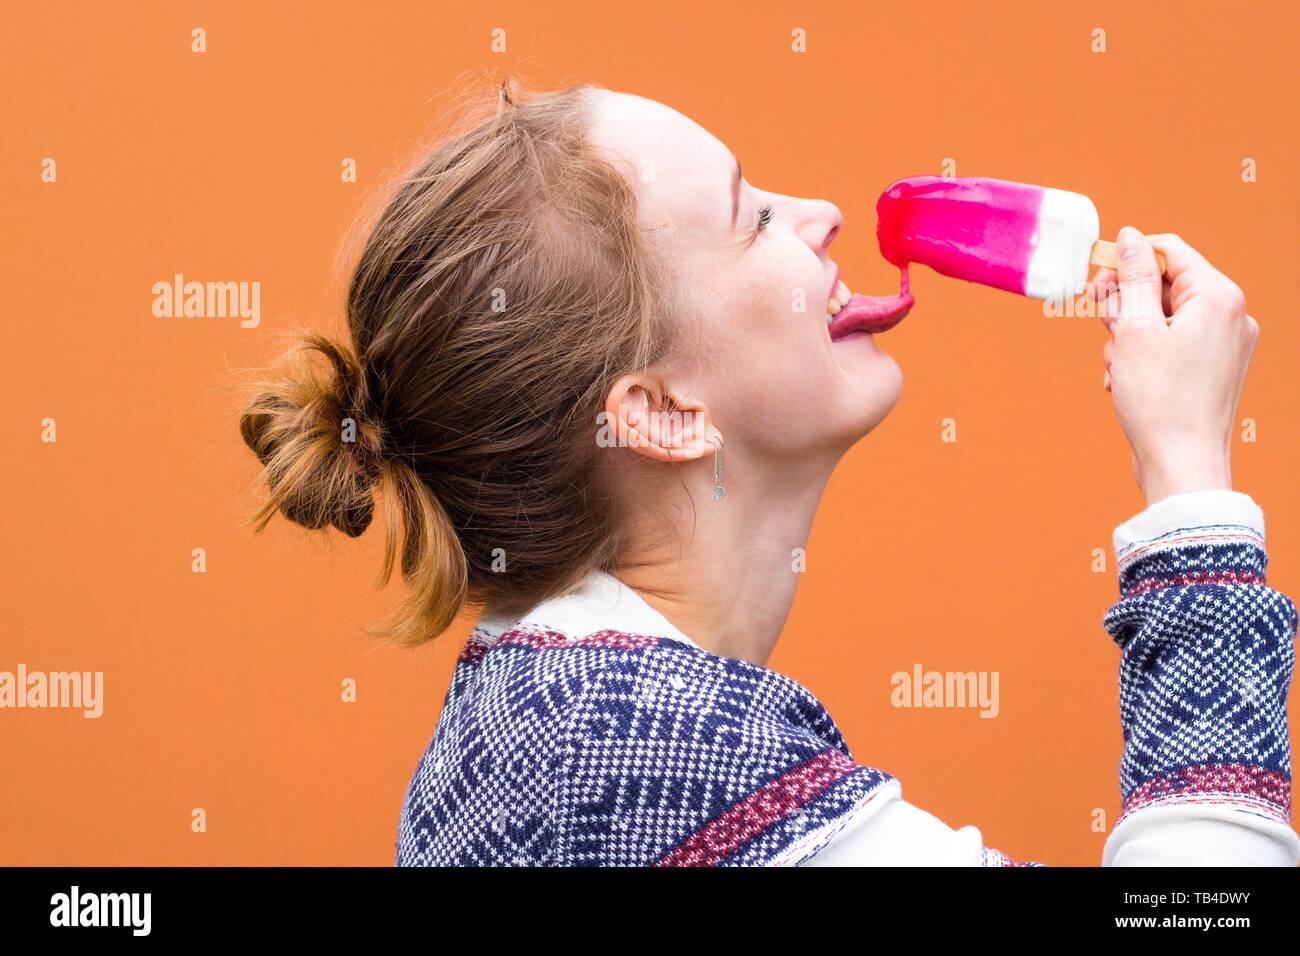 Beautiful and young girl eats a pink hue ice cream and enjoys. She catches a drop of melted ice cream with her tongue and smiles. Stock Photo